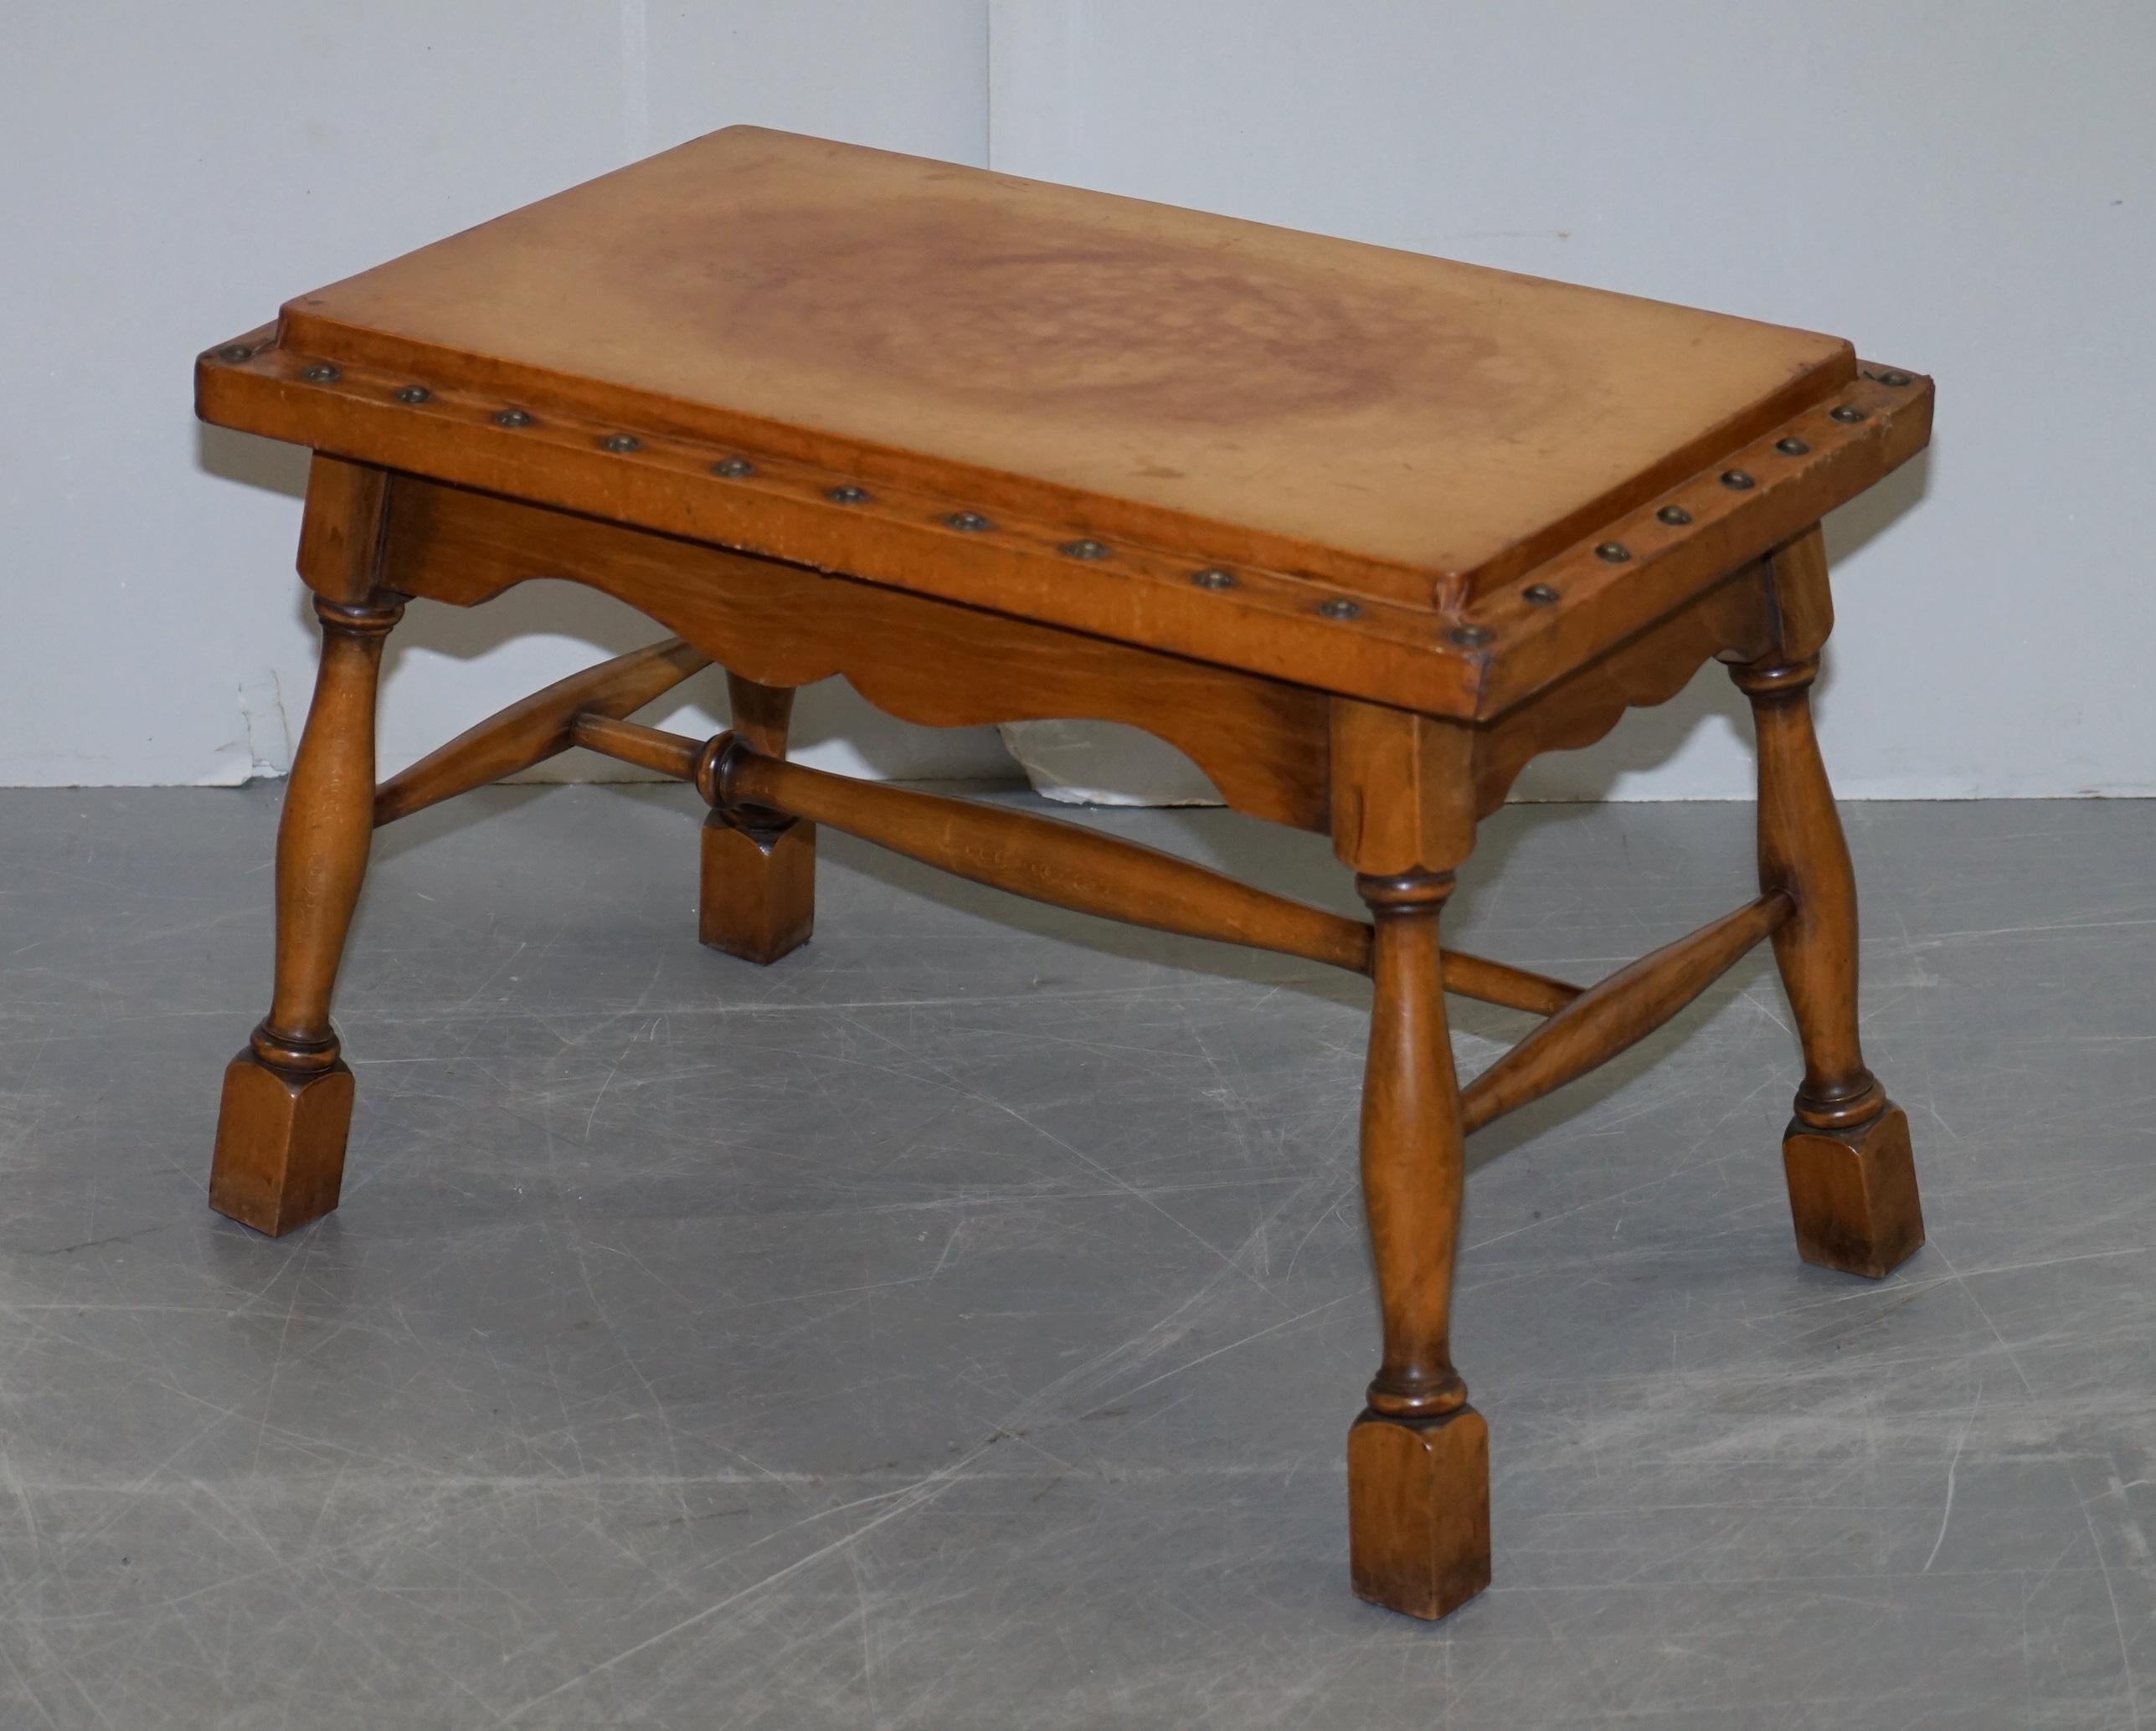 We are delighted to offer for sale this lovely pair of Edwardian oak and brown leather upholstered large side tables with antique studs

A very decorative pair of Edwardian tables

This pair of tables have the original leather which is nicely